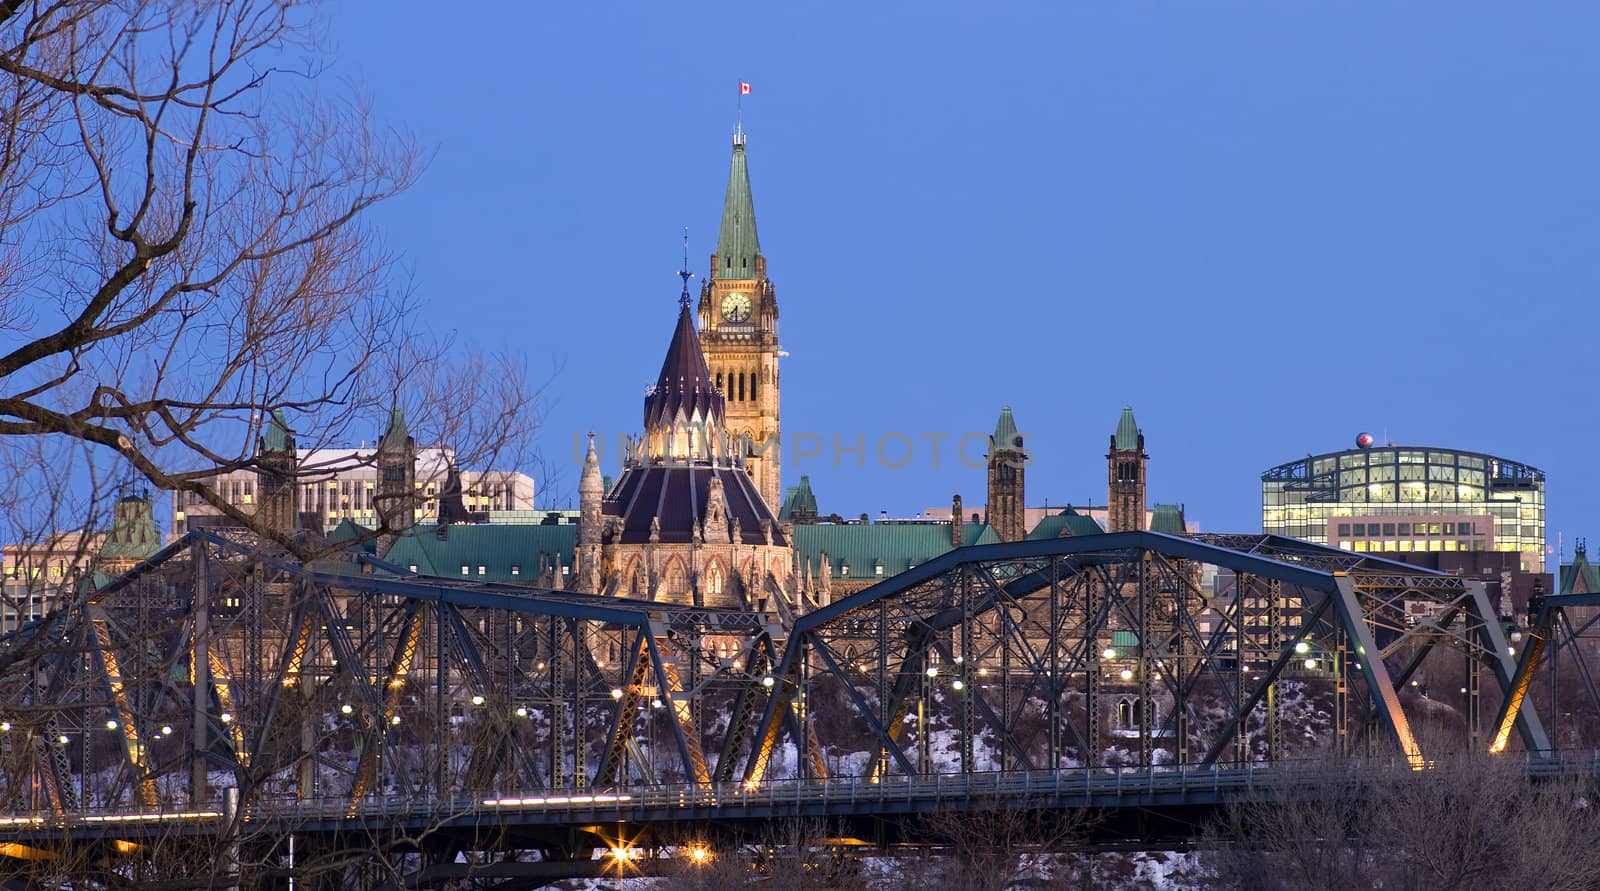 The canadian Parliament seen behind the Alexandra provincial bridge in Ottawa during the twilight hour.